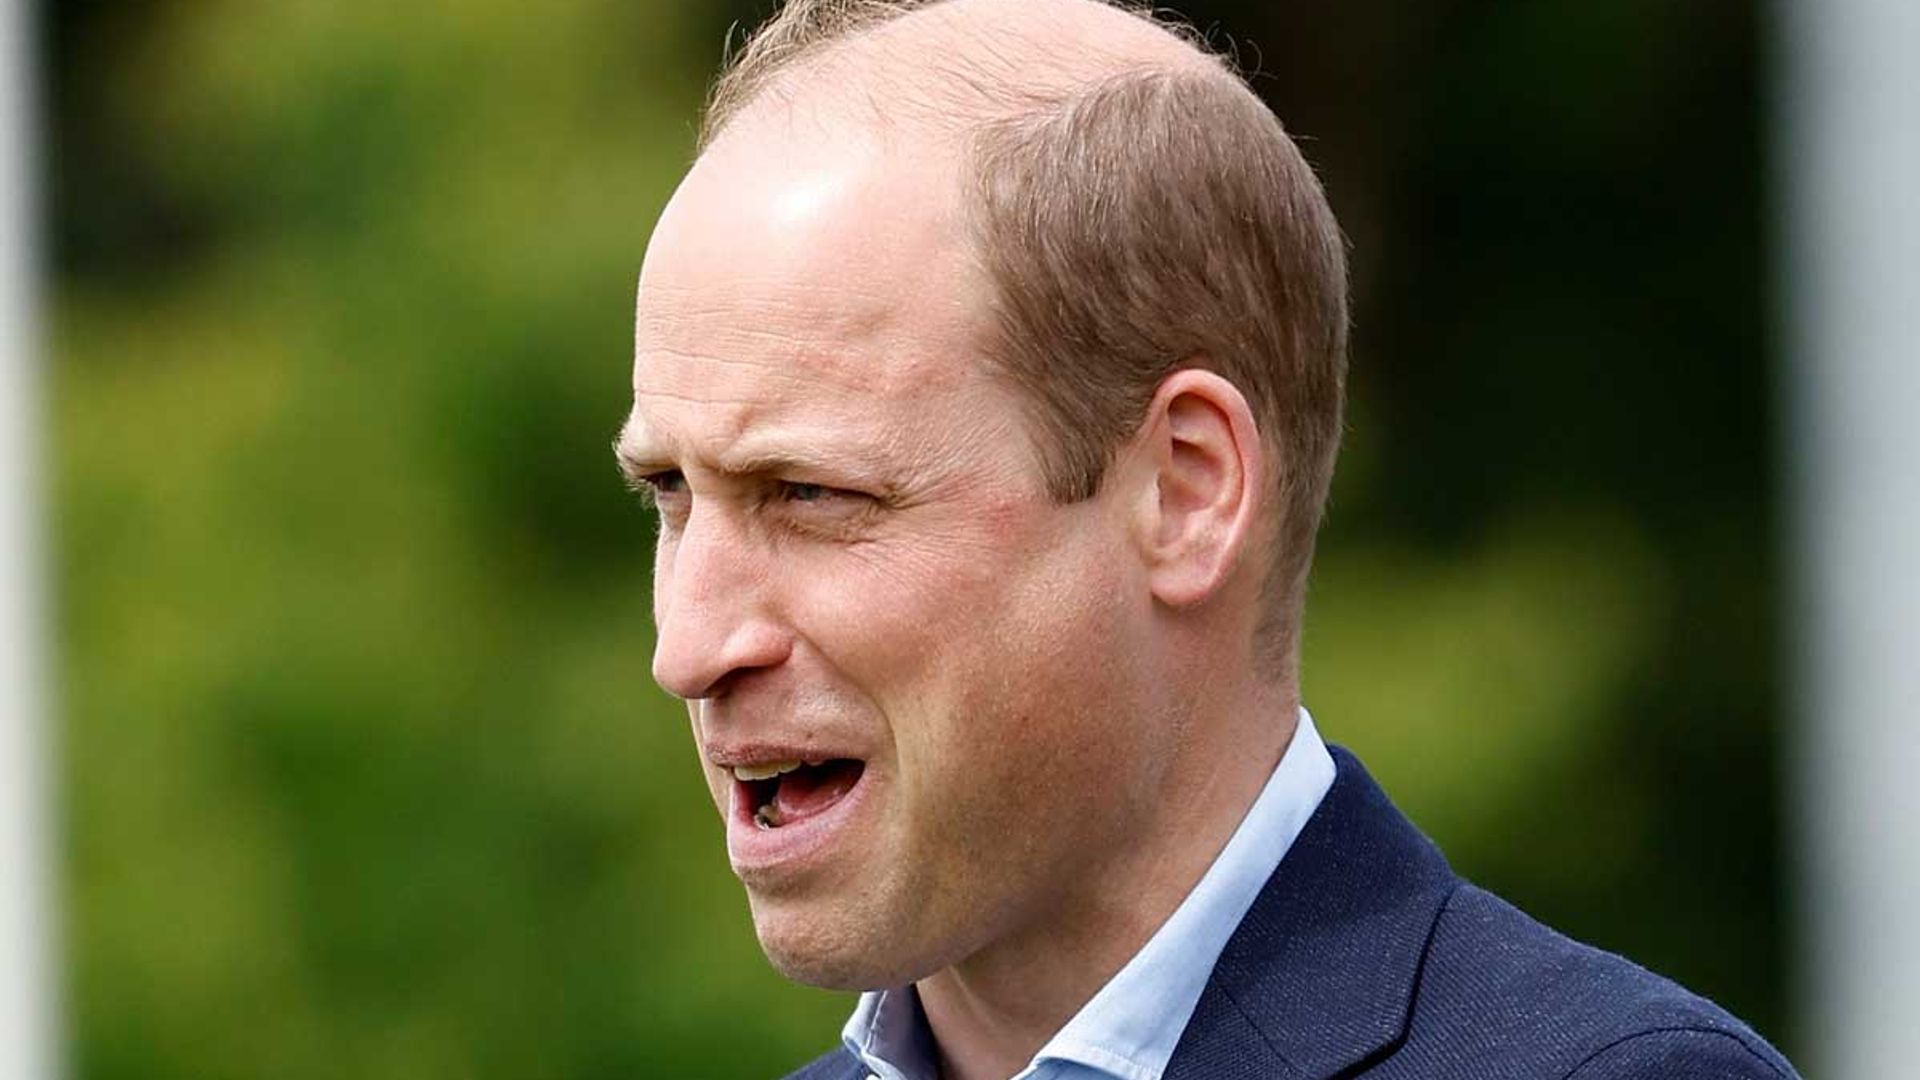 Prince William’s important lifestyle changes ahead of new decade